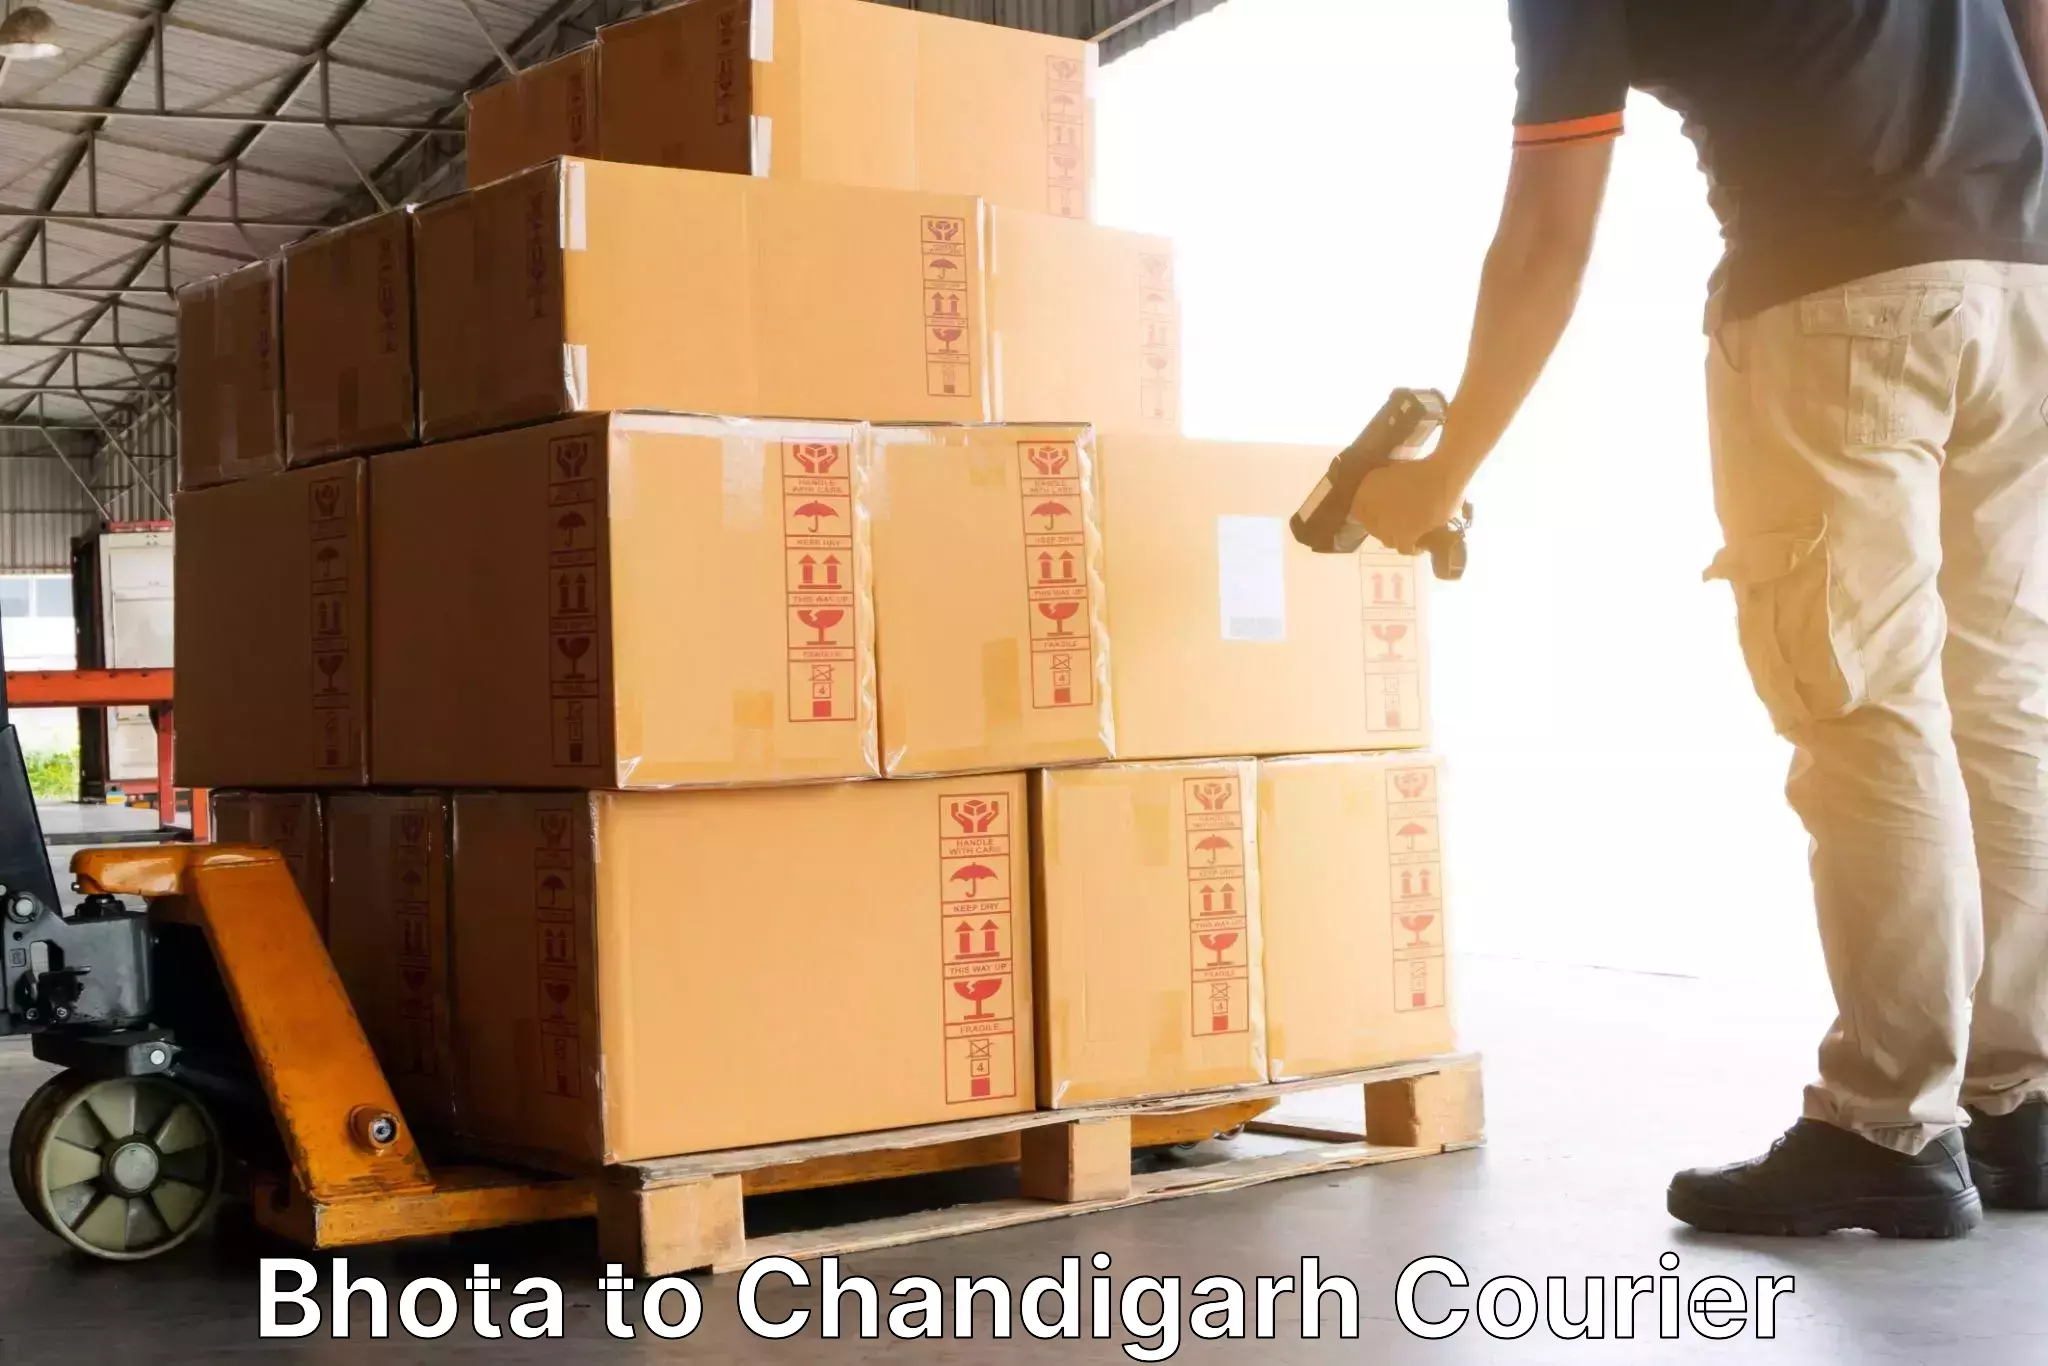 State-of-the-art courier technology Bhota to Chandigarh